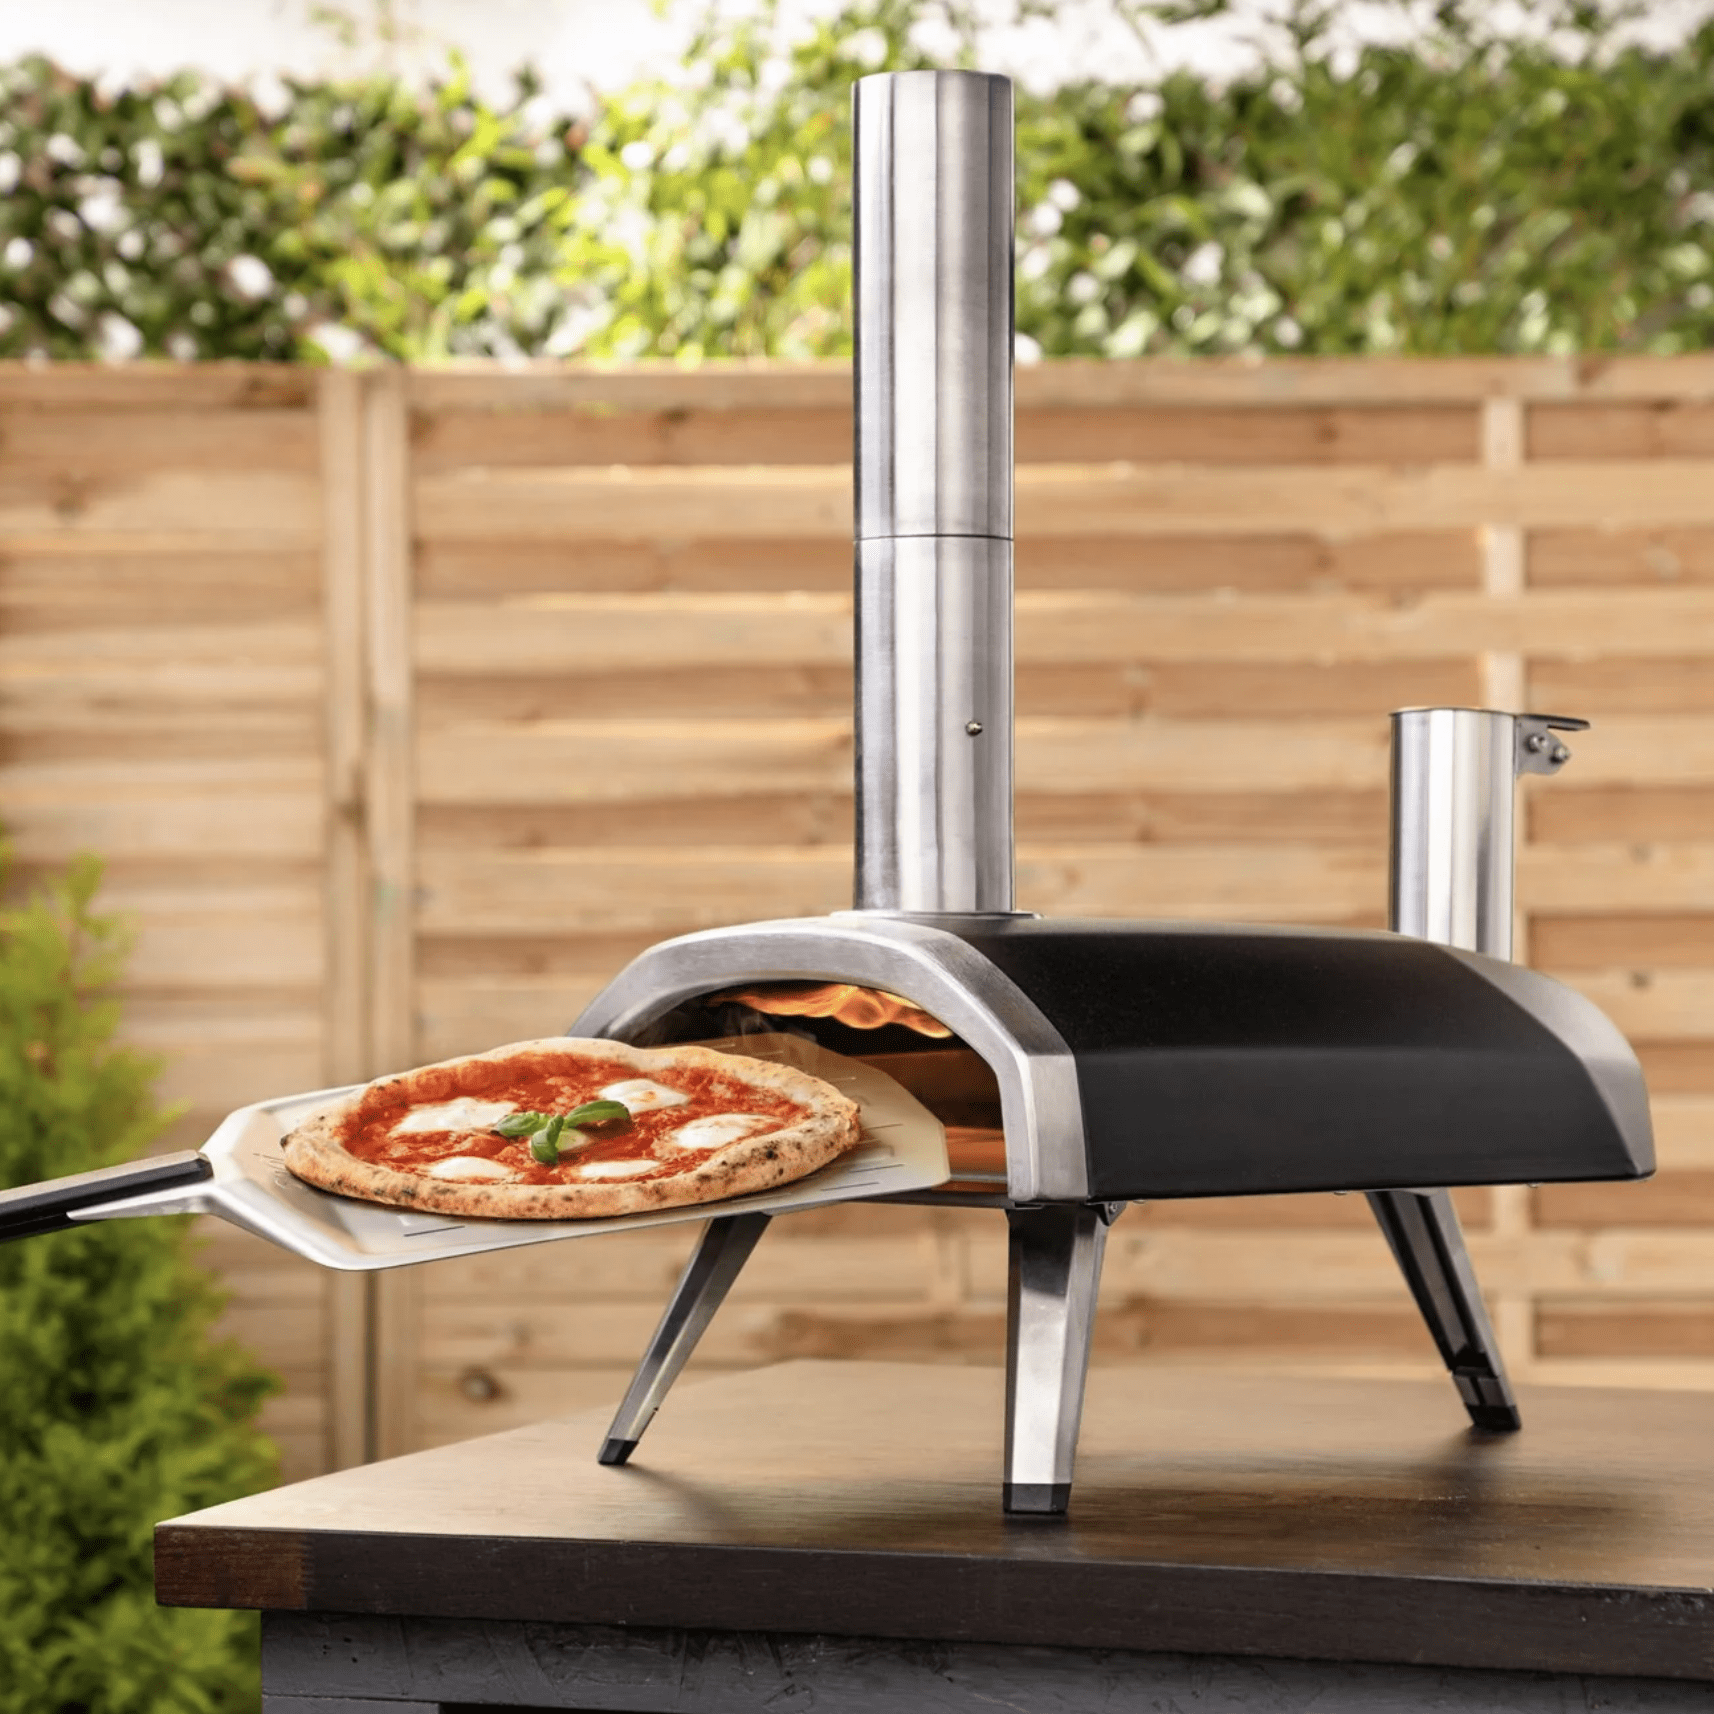 https://www.tasteofhome.com/wp-content/uploads/2023/05/ooni-pizza-oven-ecomm-e1684949328477.png?fit=700%2C700